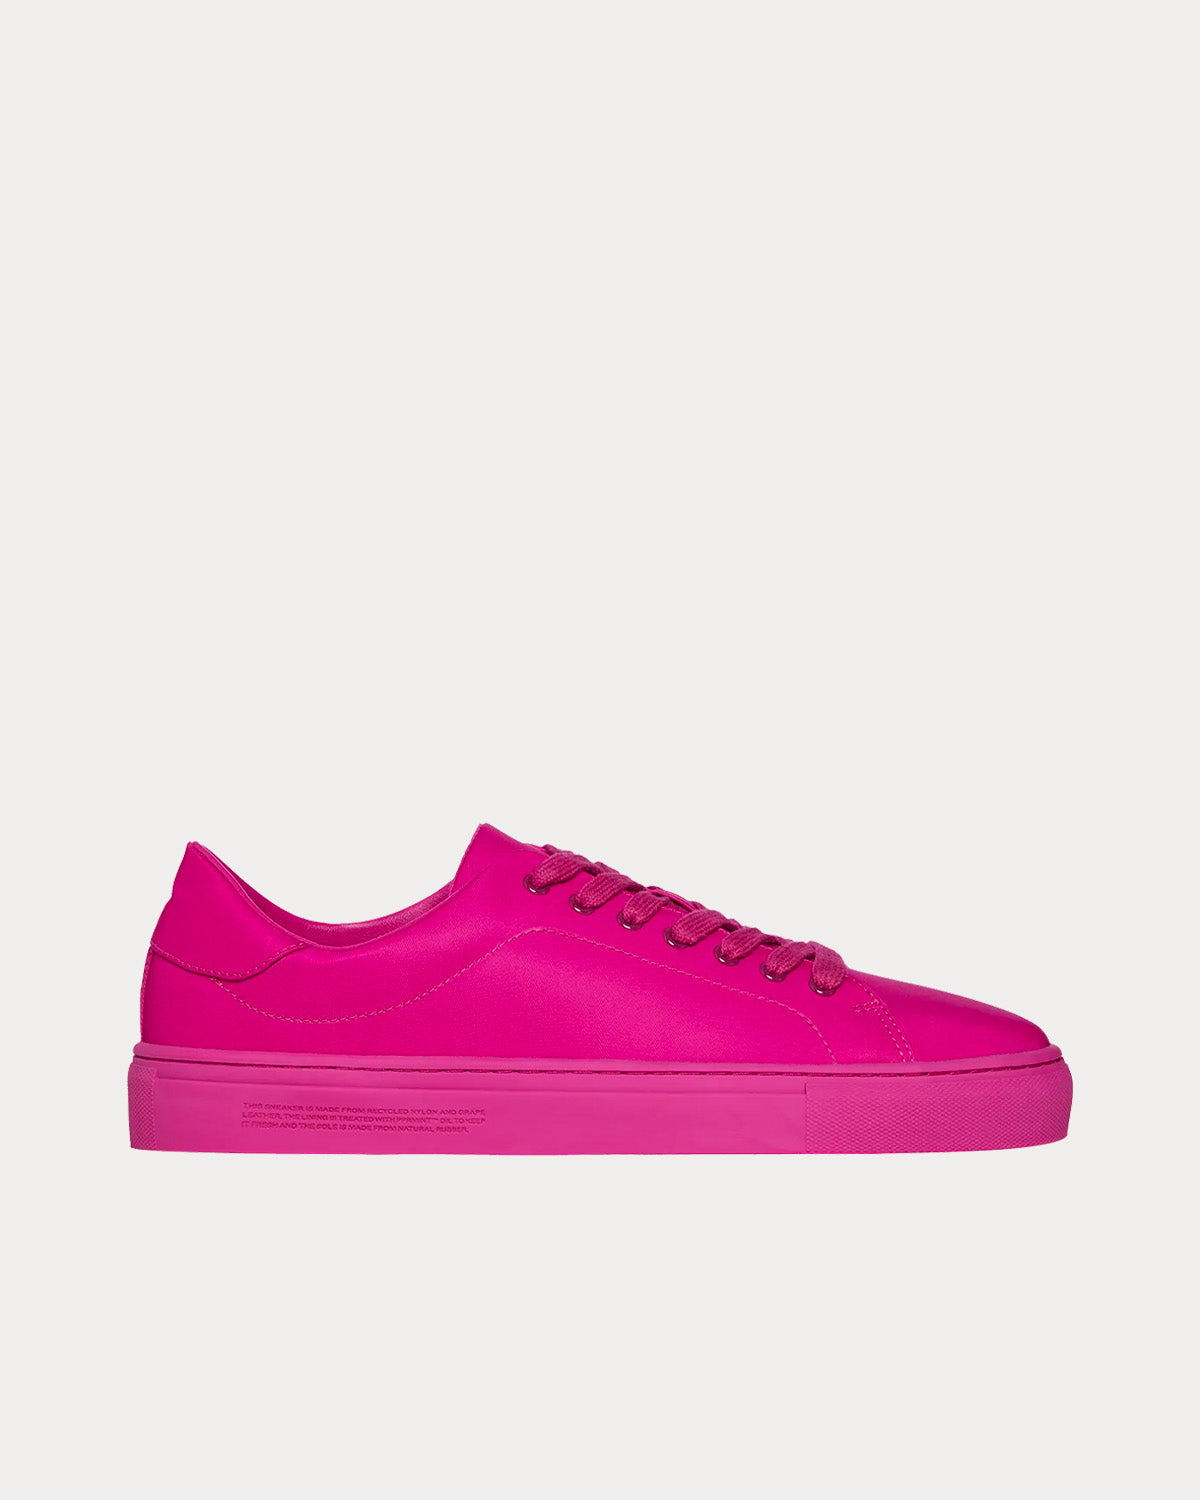 Pangaia - Recycled Nylon Foxglove Pink Low Top Sneakers